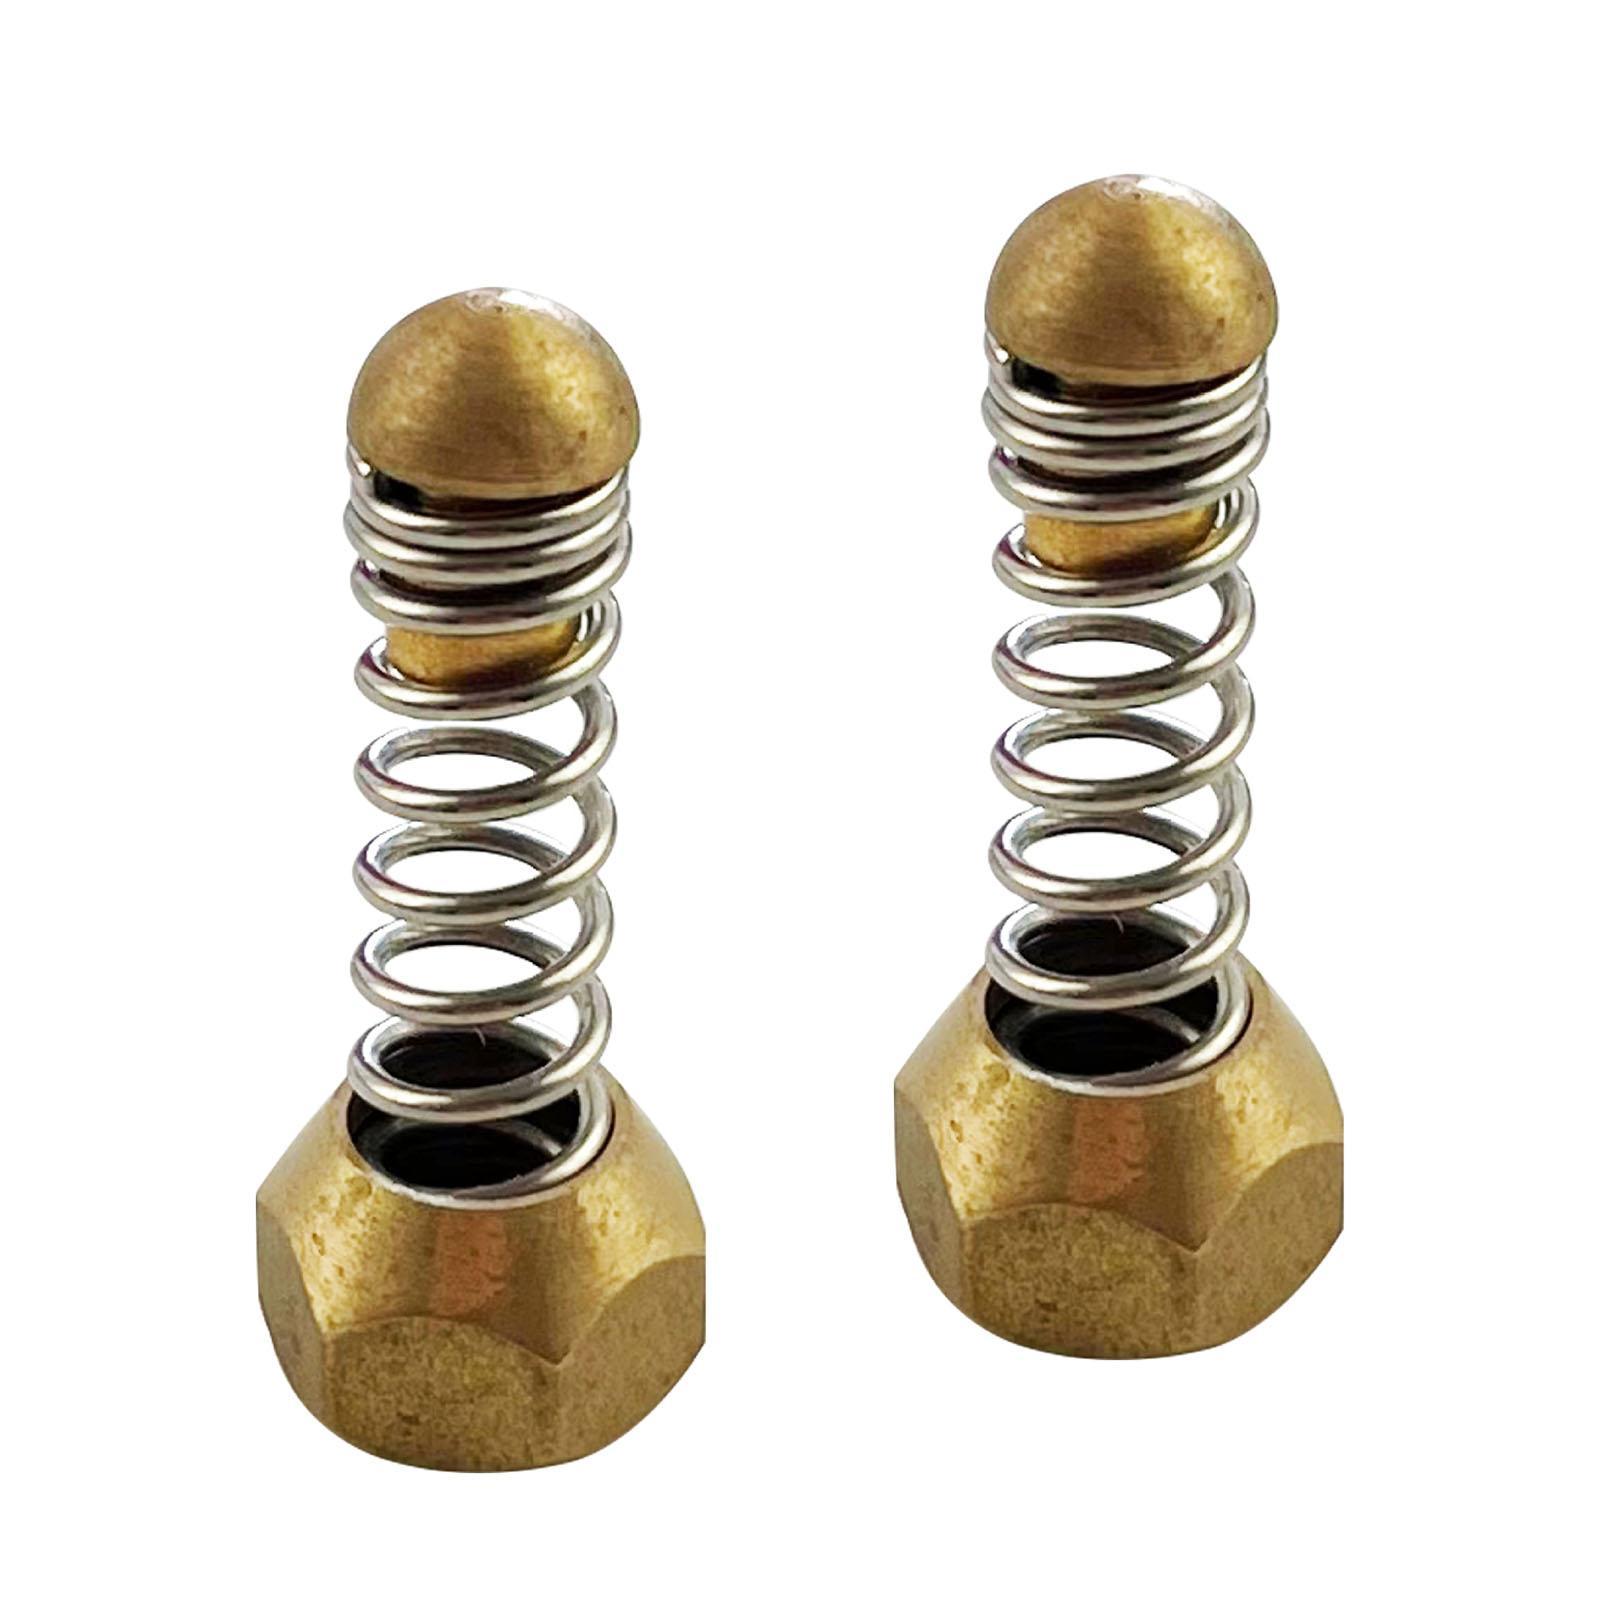 2 Pieces Sewer Jetting Pipe Nozzle with Spring for Pressure Washer Tool